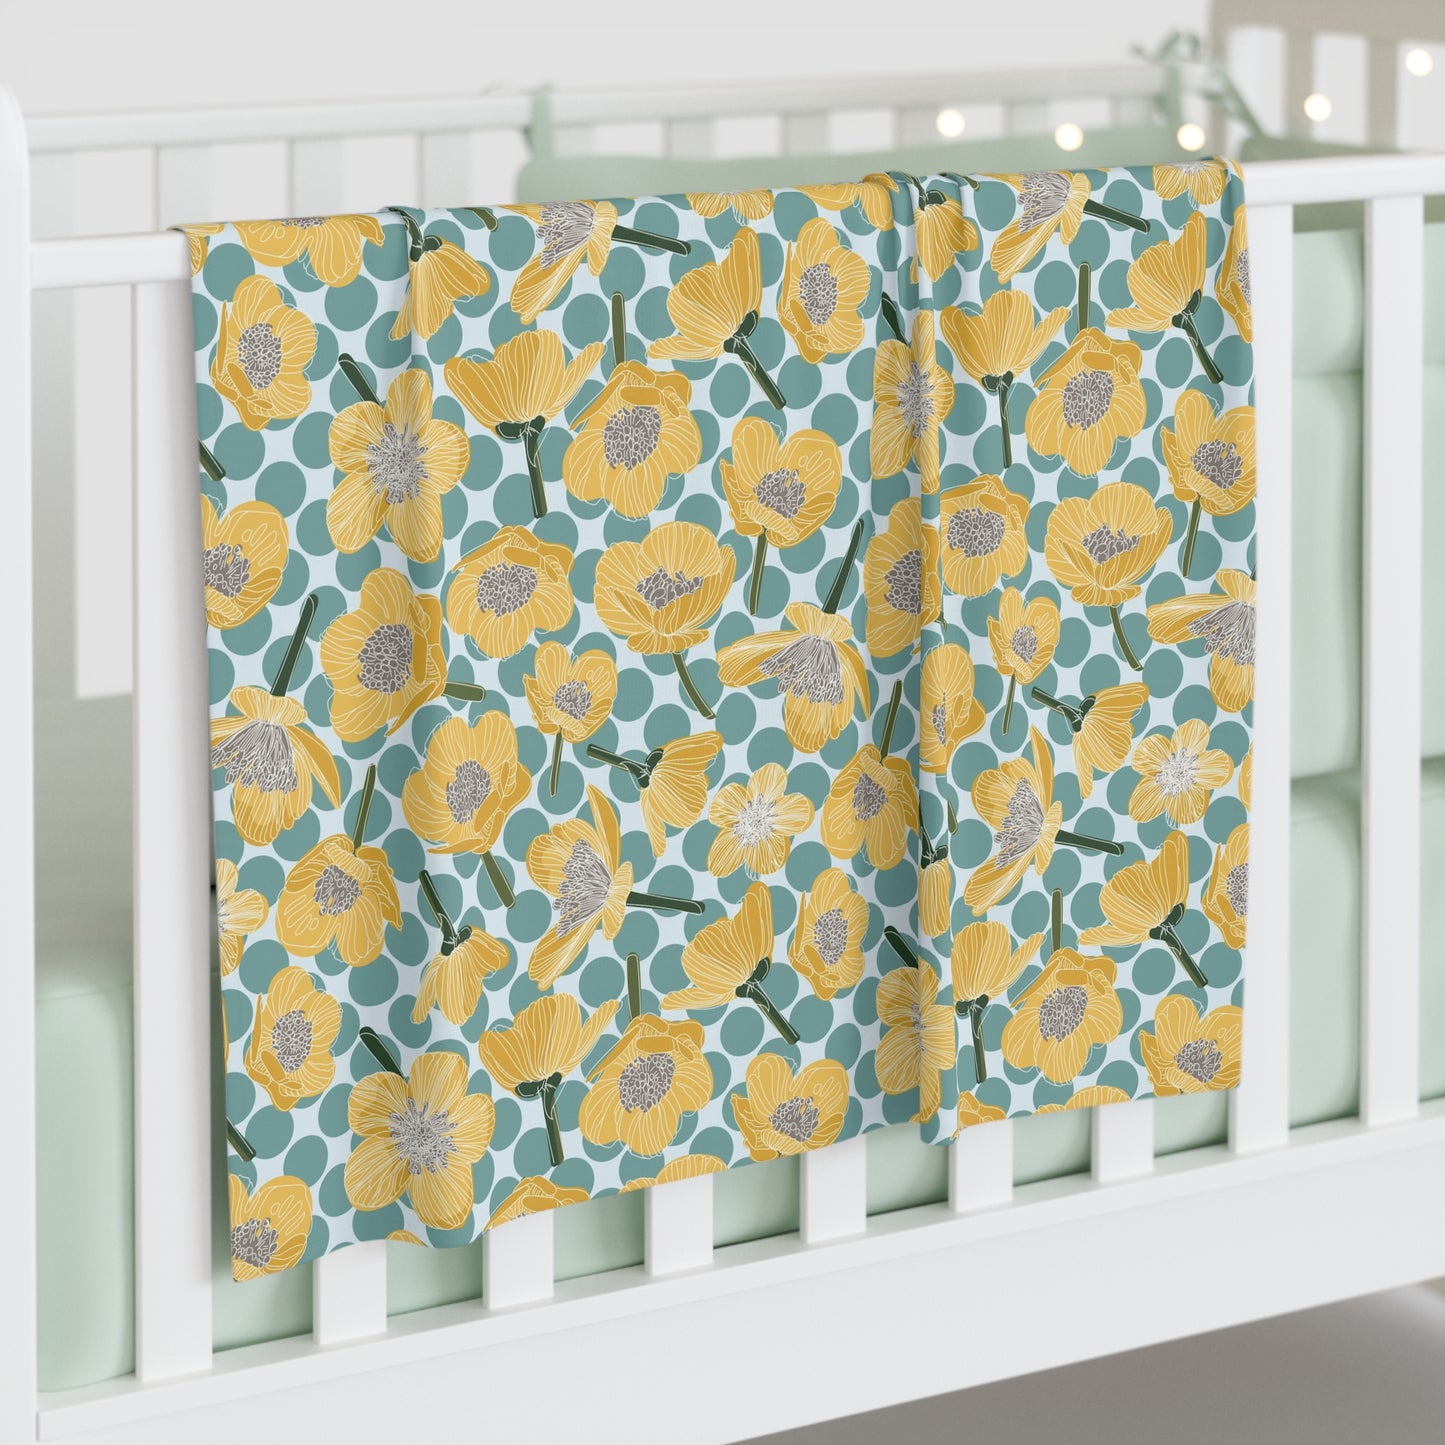 Buttercups and Polka Dots Baby Swaddle Blanket